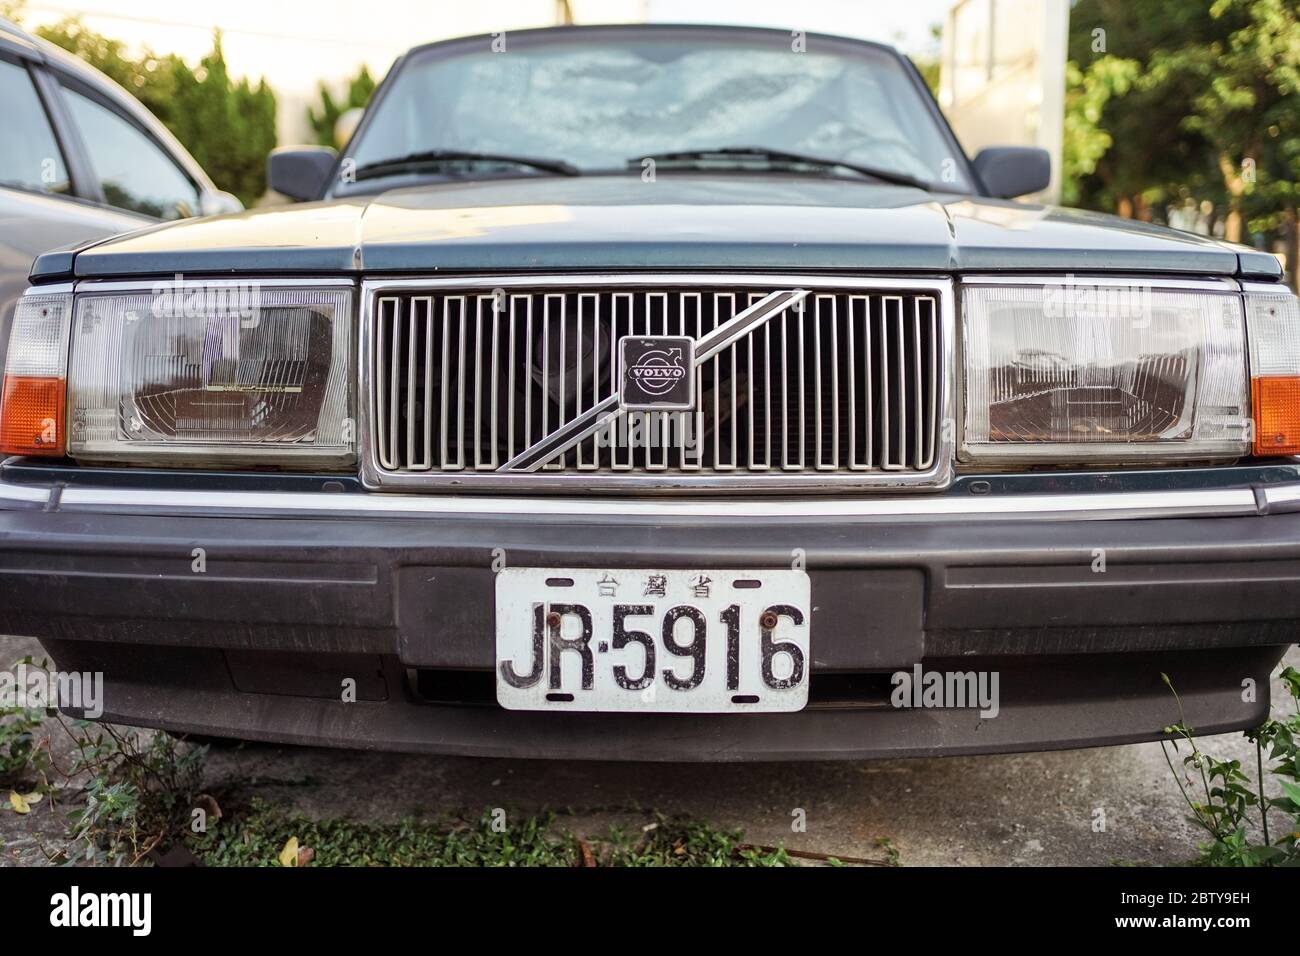 Hsinchu / Taiwan - September 15, 2019: front image of old Volvo car with Taiwanese number plate Stock Photo